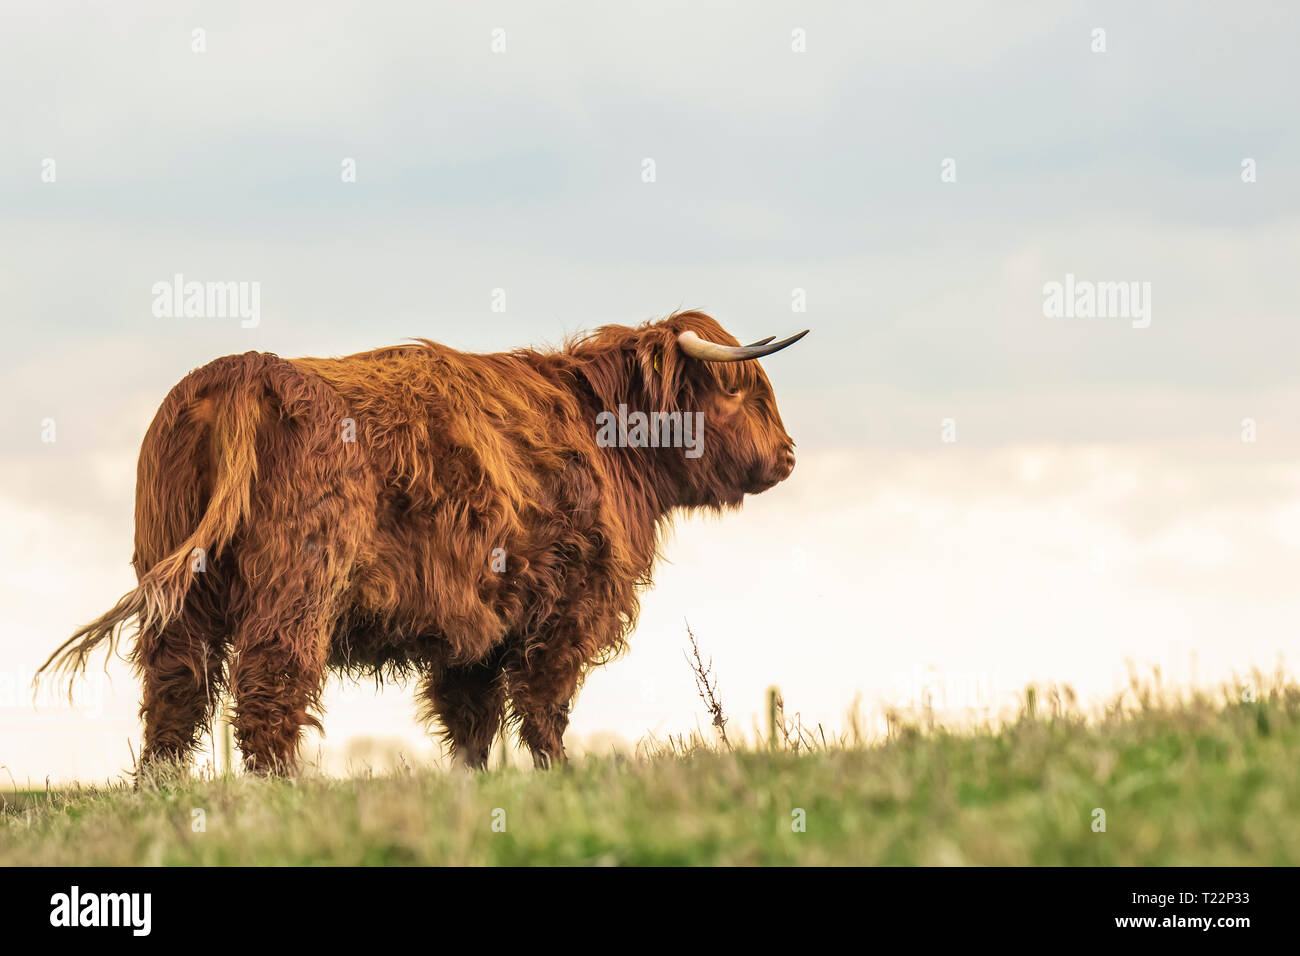 Closeup of brown red Highland cattle, Scottish cattle breed (Bos taurus) with long horns walking through heather in heathland. Stock Photo